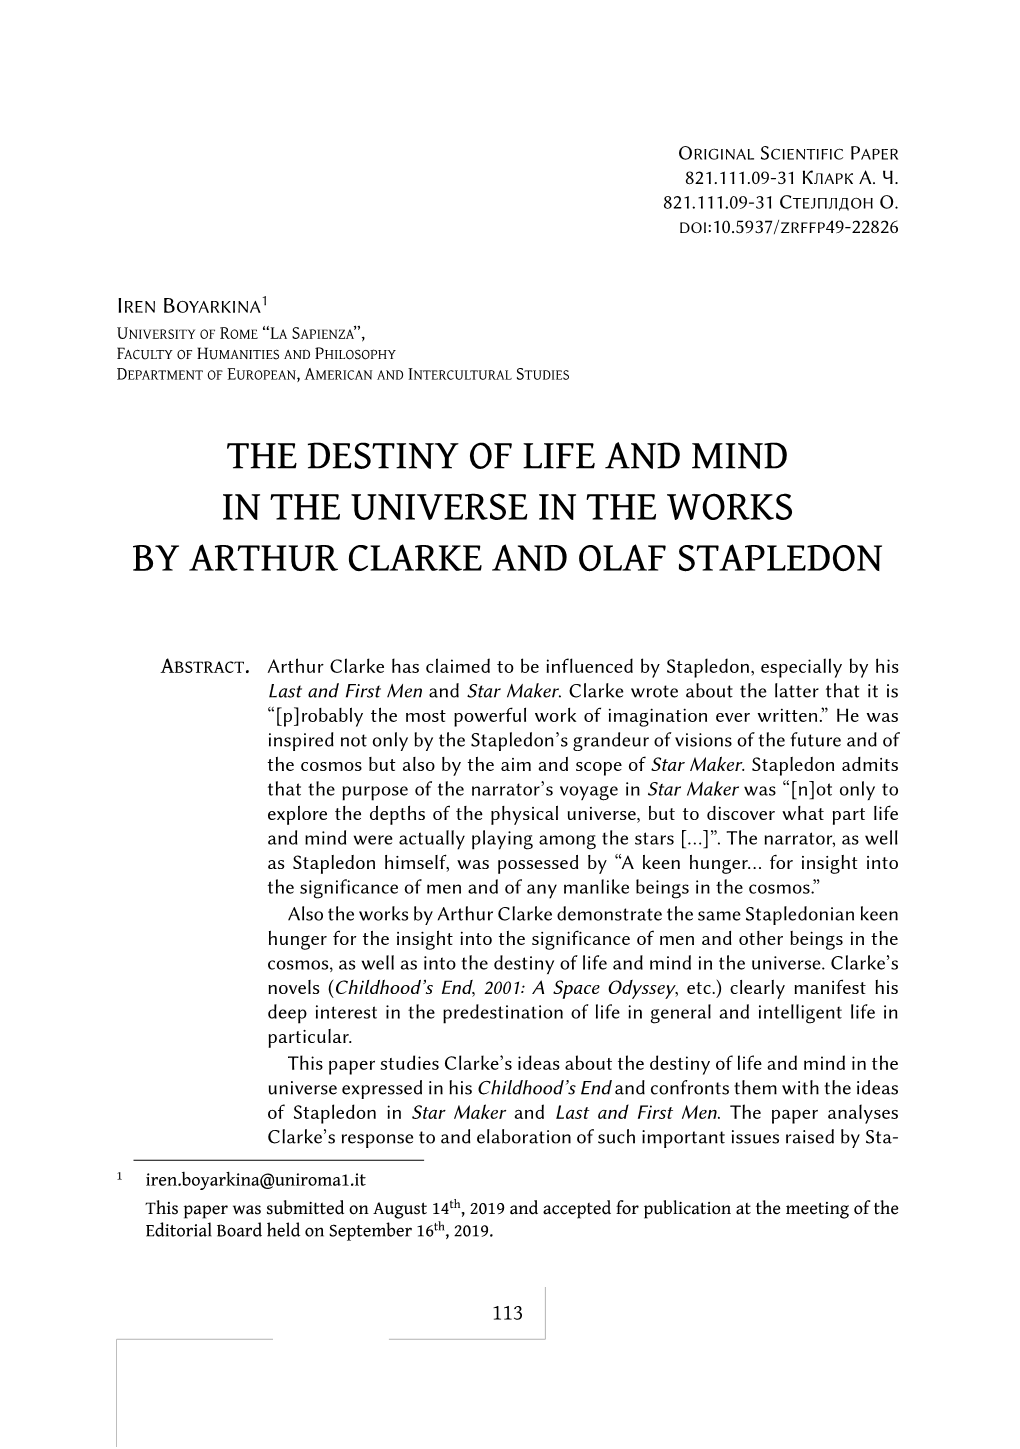 The Destiny of Life and Mind in the Universe in the Works by Arthur Clarke and Olaf Stapledon